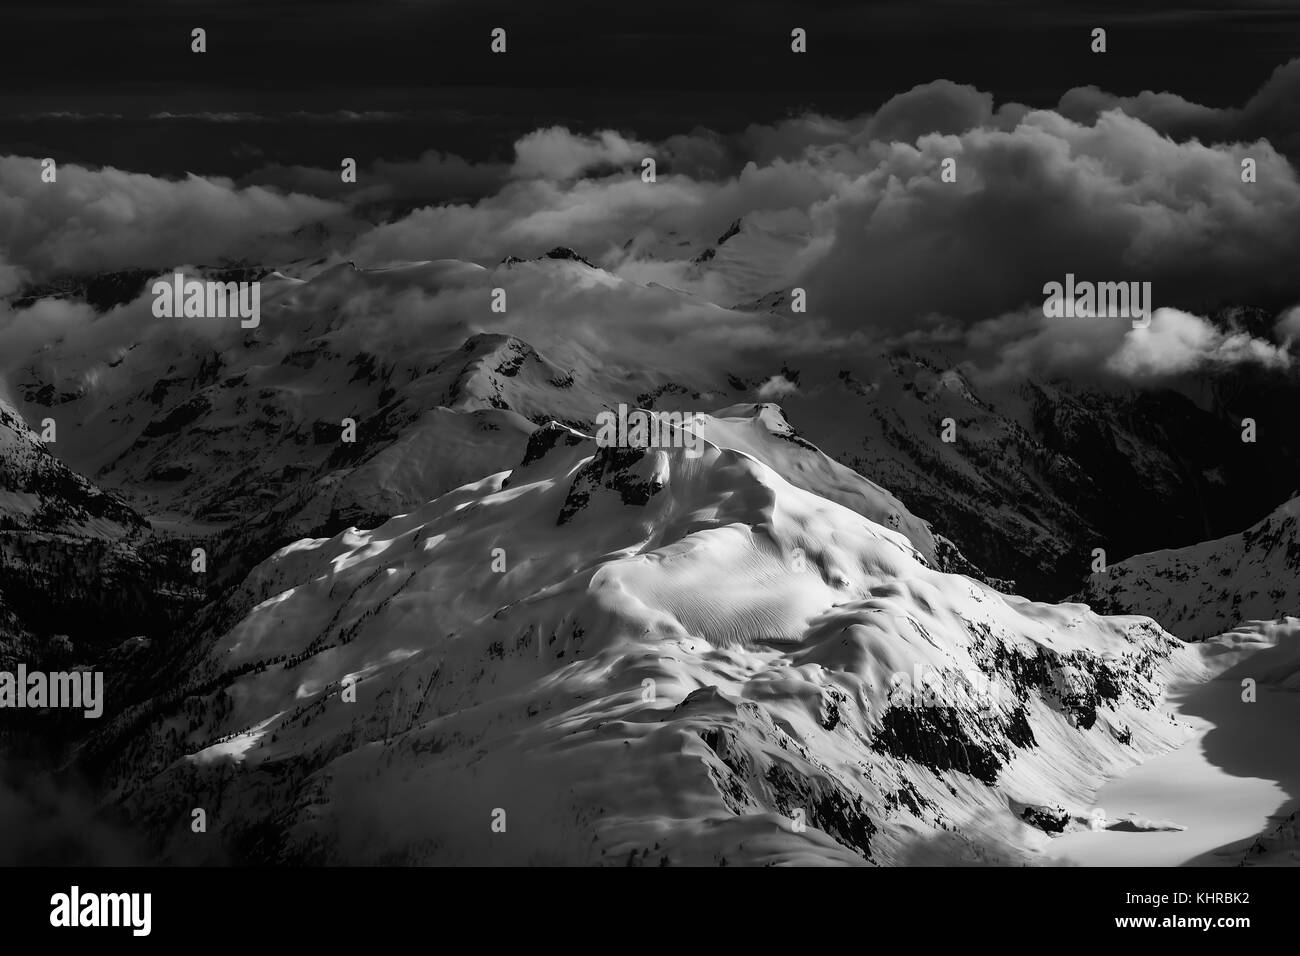 Striking aerial mountain range landscape. High Contrast, Black and White, and Artistic Render Stock Photo